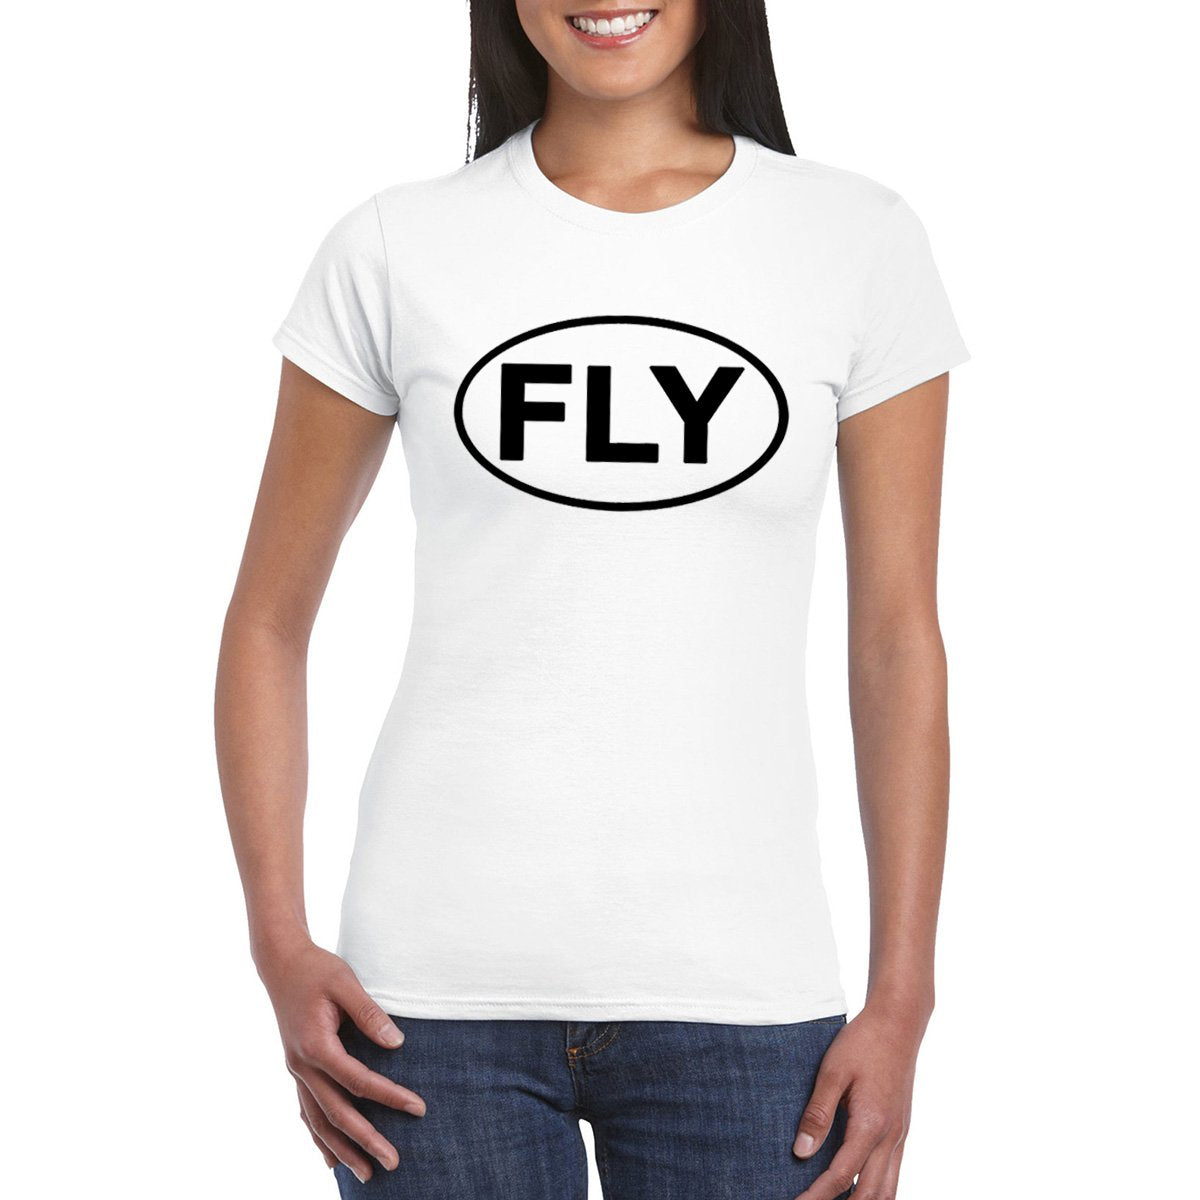 FLY Semi-Fitted Women's T-Shirt